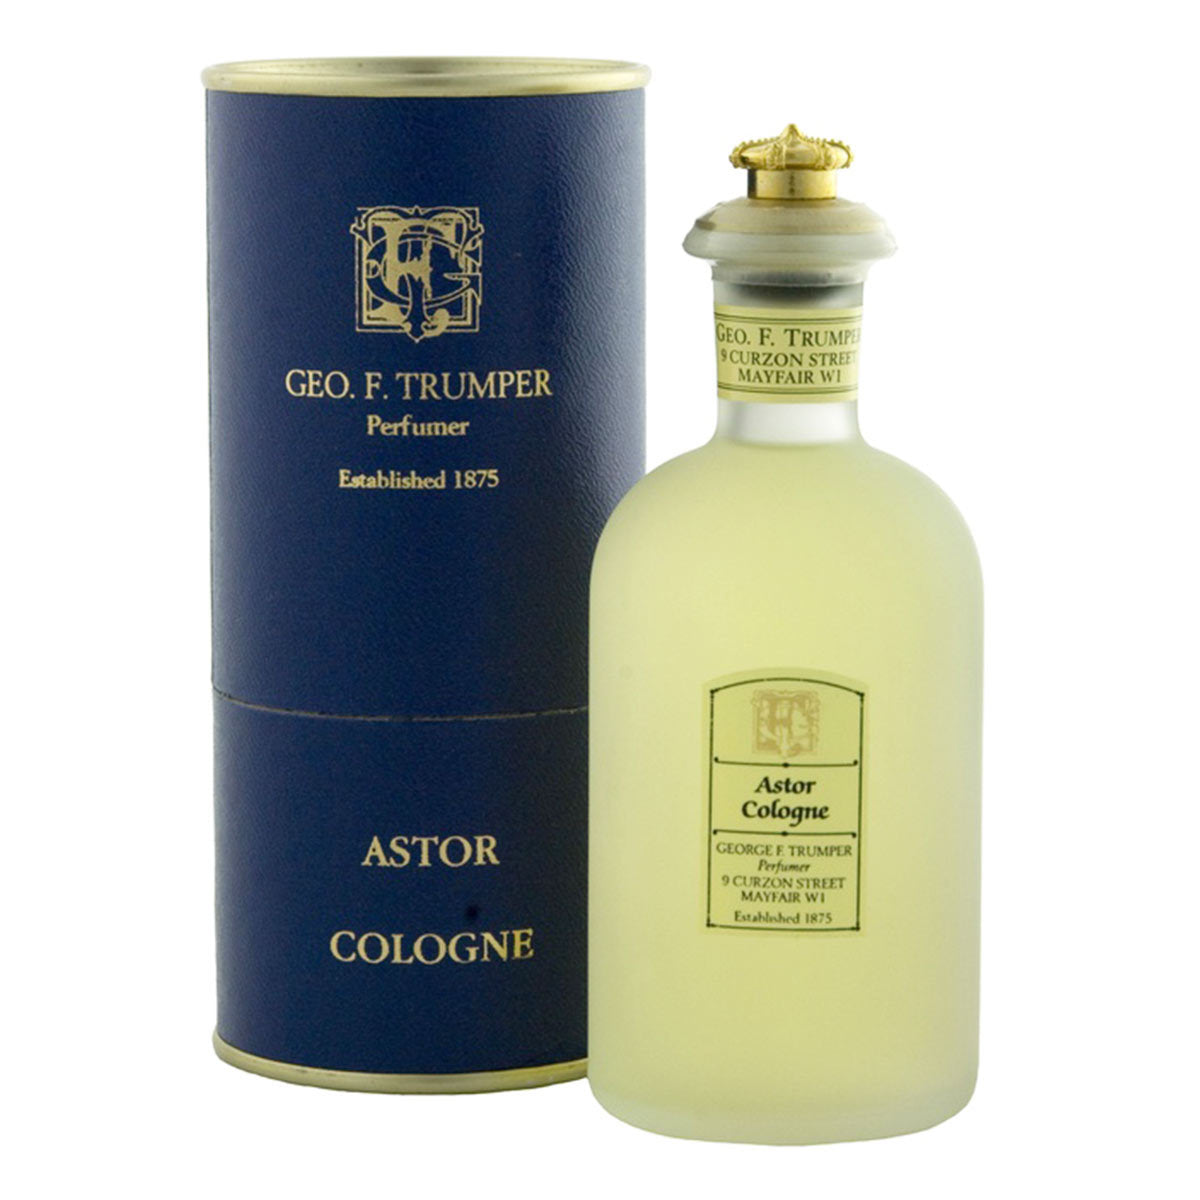 Primary image of Astor Cologne